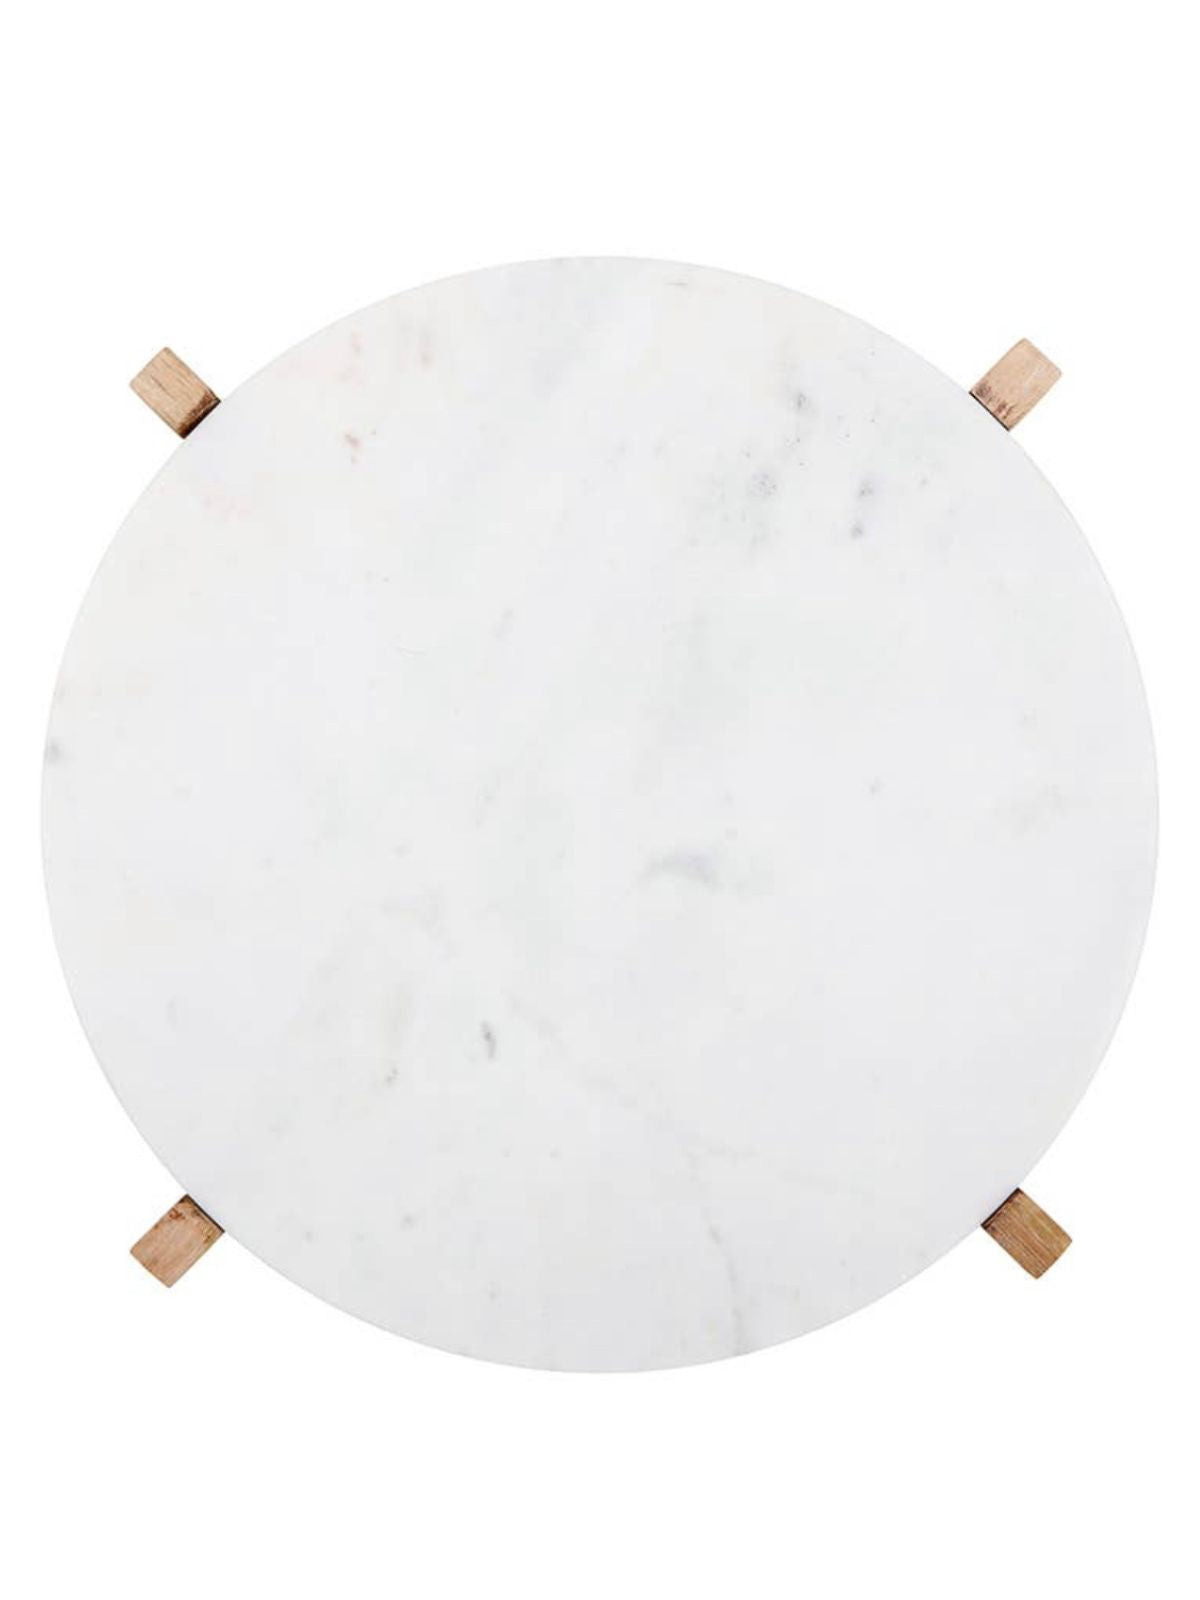 White Marble Serving Tray on Mango Wood Pedestal Sold by KYA Home Decor.